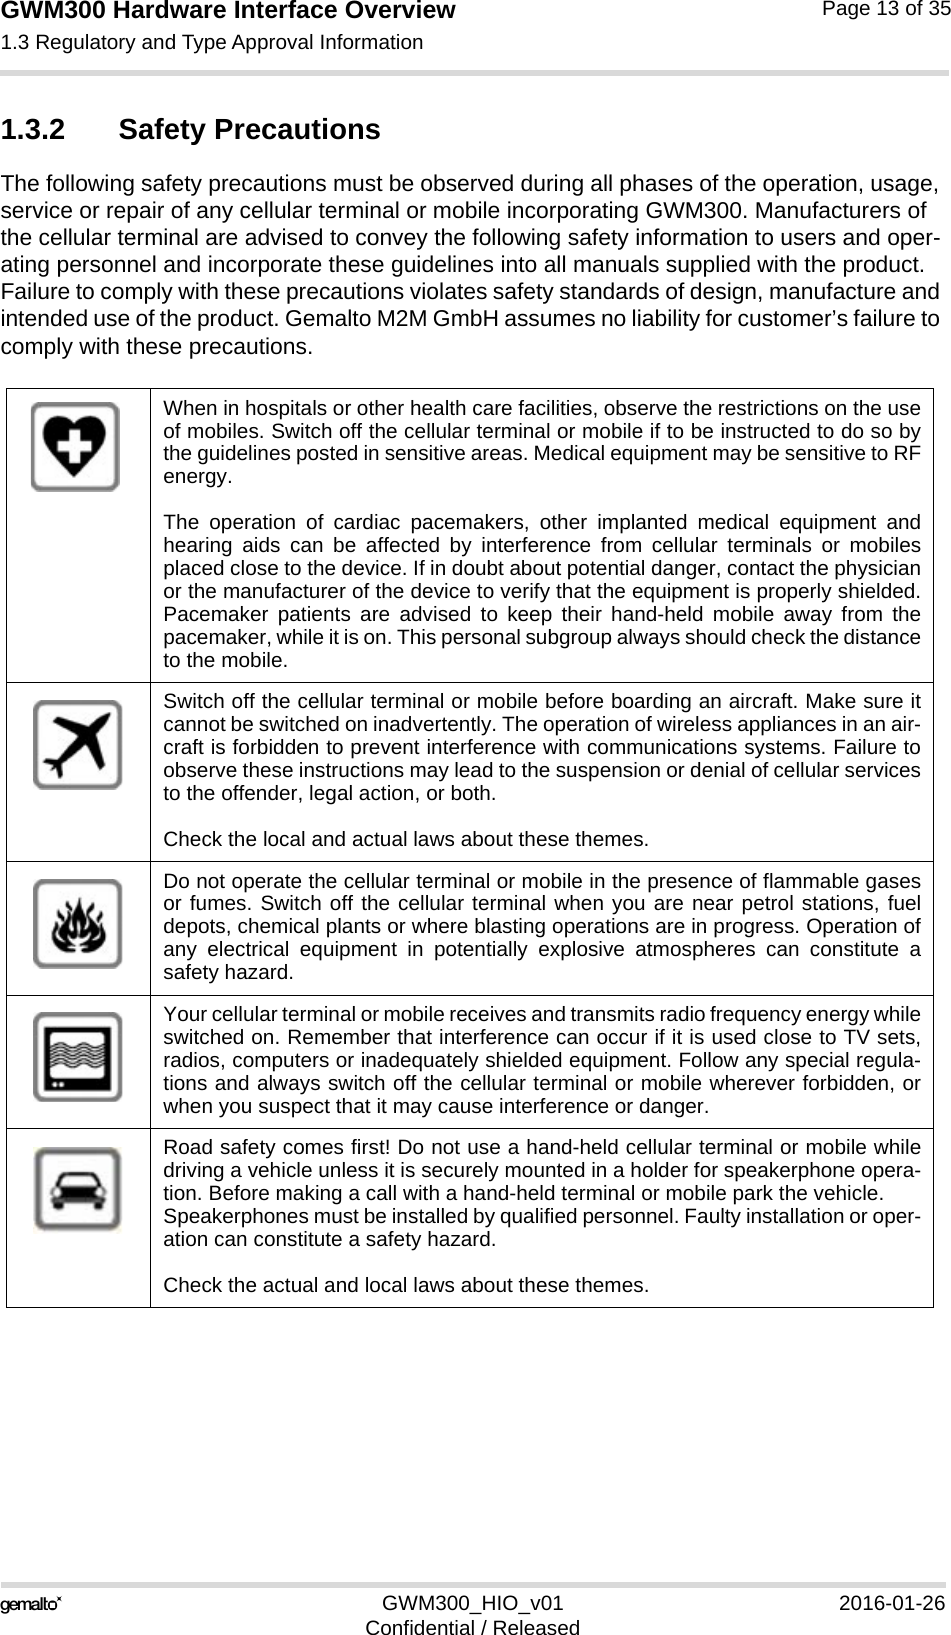 GWM300 Hardware Interface Overview1.3 Regulatory and Type Approval Information15GWM300_HIO_v01 2016-01-26Confidential / ReleasedPage 13 of 351.3.2 Safety PrecautionsThe following safety precautions must be observed during all phases of the operation, usage, service or repair of any cellular terminal or mobile incorporating GWM300. Manufacturers of the cellular terminal are advised to convey the following safety information to users and oper-ating personnel and incorporate these guidelines into all manuals supplied with the product. Failure to comply with these precautions violates safety standards of design, manufacture and intended use of the product. Gemalto M2M GmbH assumes no liability for customer’s failure to comply with these precautions.When in hospitals or other health care facilities, observe the restrictions on the useof mobiles. Switch off the cellular terminal or mobile if to be instructed to do so bythe guidelines posted in sensitive areas. Medical equipment may be sensitive to RFenergy. The operation of cardiac pacemakers, other implanted medical equipment andhearing aids can be affected by interference from cellular terminals or mobilesplaced close to the device. If in doubt about potential danger, contact the physicianor the manufacturer of the device to verify that the equipment is properly shielded.Pacemaker patients are advised to keep their hand-held mobile away from thepacemaker, while it is on. This personal subgroup always should check the distanceto the mobile.Switch off the cellular terminal or mobile before boarding an aircraft. Make sure itcannot be switched on inadvertently. The operation of wireless appliances in an air-craft is forbidden to prevent interference with communications systems. Failure toobserve these instructions may lead to the suspension or denial of cellular servicesto the offender, legal action, or both. Check the local and actual laws about these themes.Do not operate the cellular terminal or mobile in the presence of flammable gasesor fumes. Switch off the cellular terminal when you are near petrol stations, fueldepots, chemical plants or where blasting operations are in progress. Operation ofany electrical equipment in potentially explosive atmospheres can constitute asafety hazard.Your cellular terminal or mobile receives and transmits radio frequency energy whileswitched on. Remember that interference can occur if it is used close to TV sets,radios, computers or inadequately shielded equipment. Follow any special regula-tions and always switch off the cellular terminal or mobile wherever forbidden, orwhen you suspect that it may cause interference or danger.Road safety comes first! Do not use a hand-held cellular terminal or mobile whiledriving a vehicle unless it is securely mounted in a holder for speakerphone opera-tion. Before making a call with a hand-held terminal or mobile park the vehicle. Speakerphones must be installed by qualified personnel. Faulty installation or oper-ation can constitute a safety hazard.Check the actual and local laws about these themes.